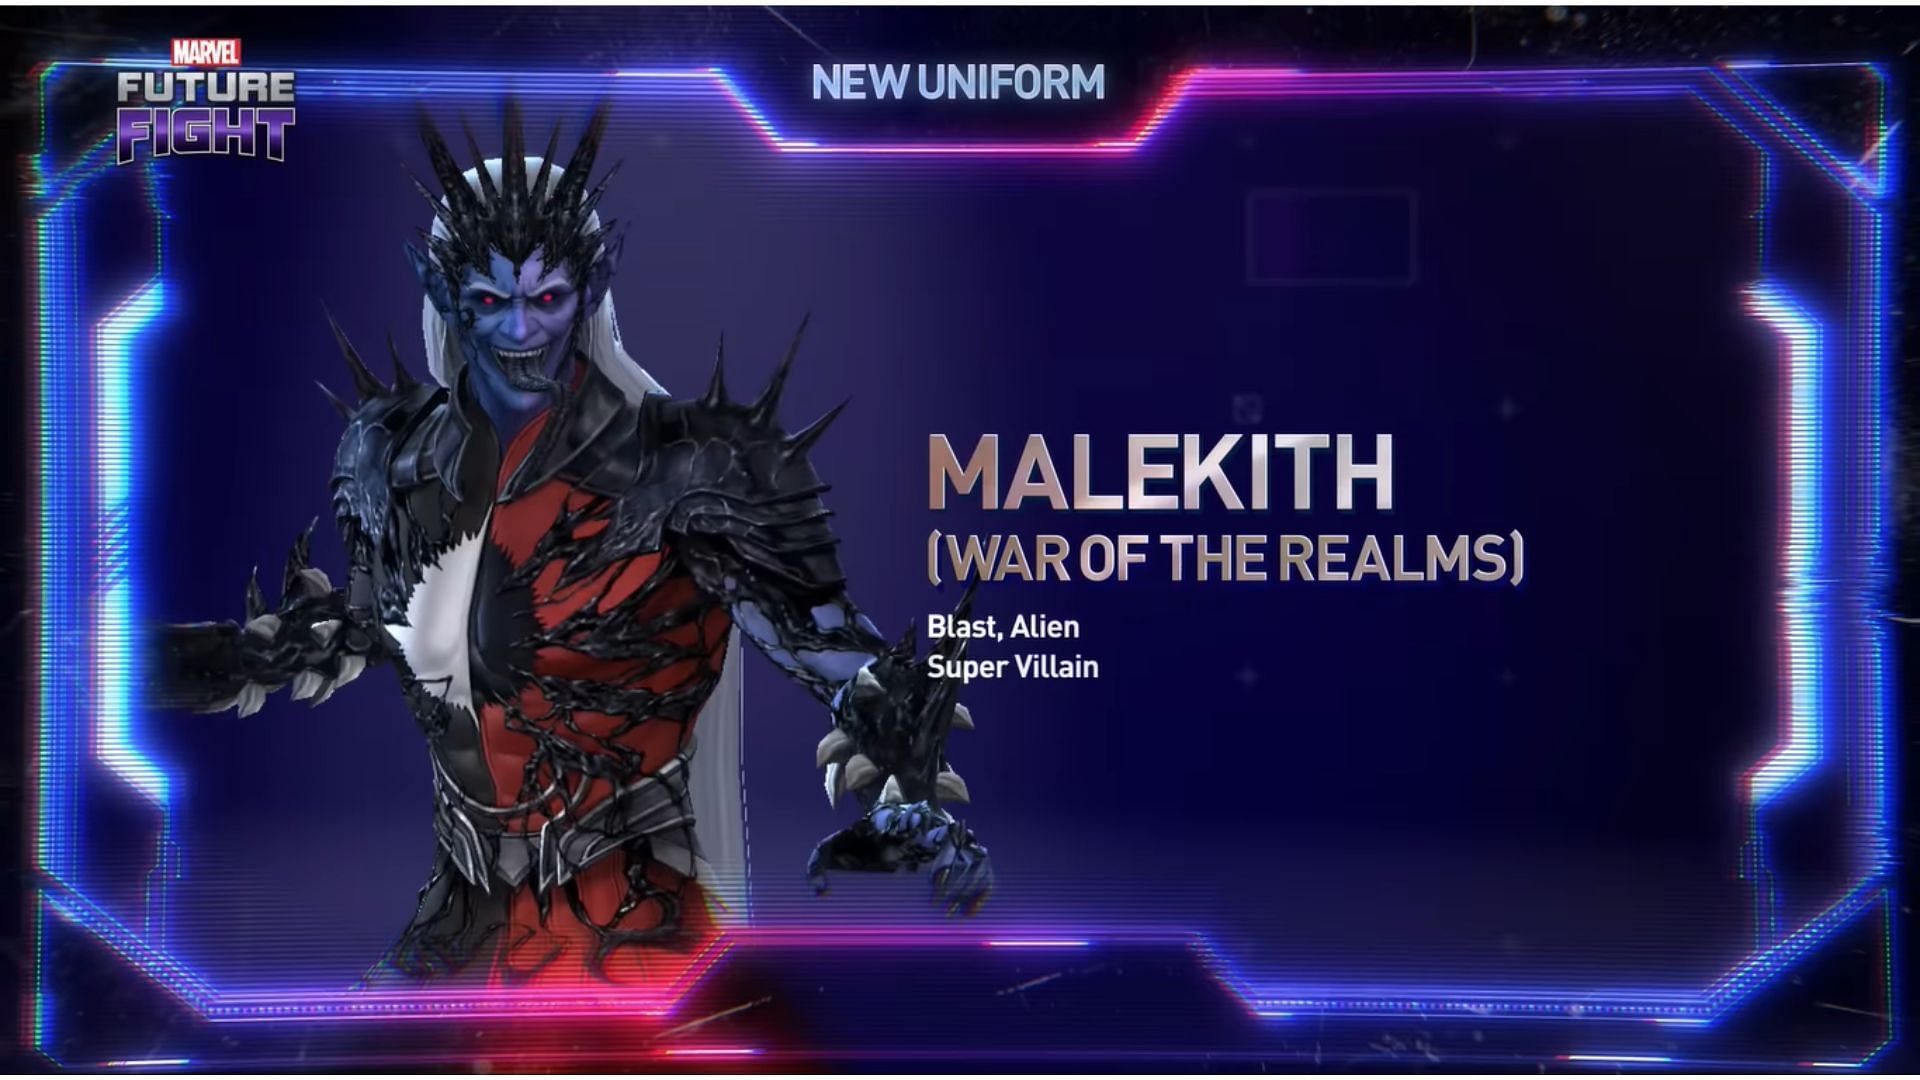 Marvel Future Fight adds new uniforms and content upgrades in